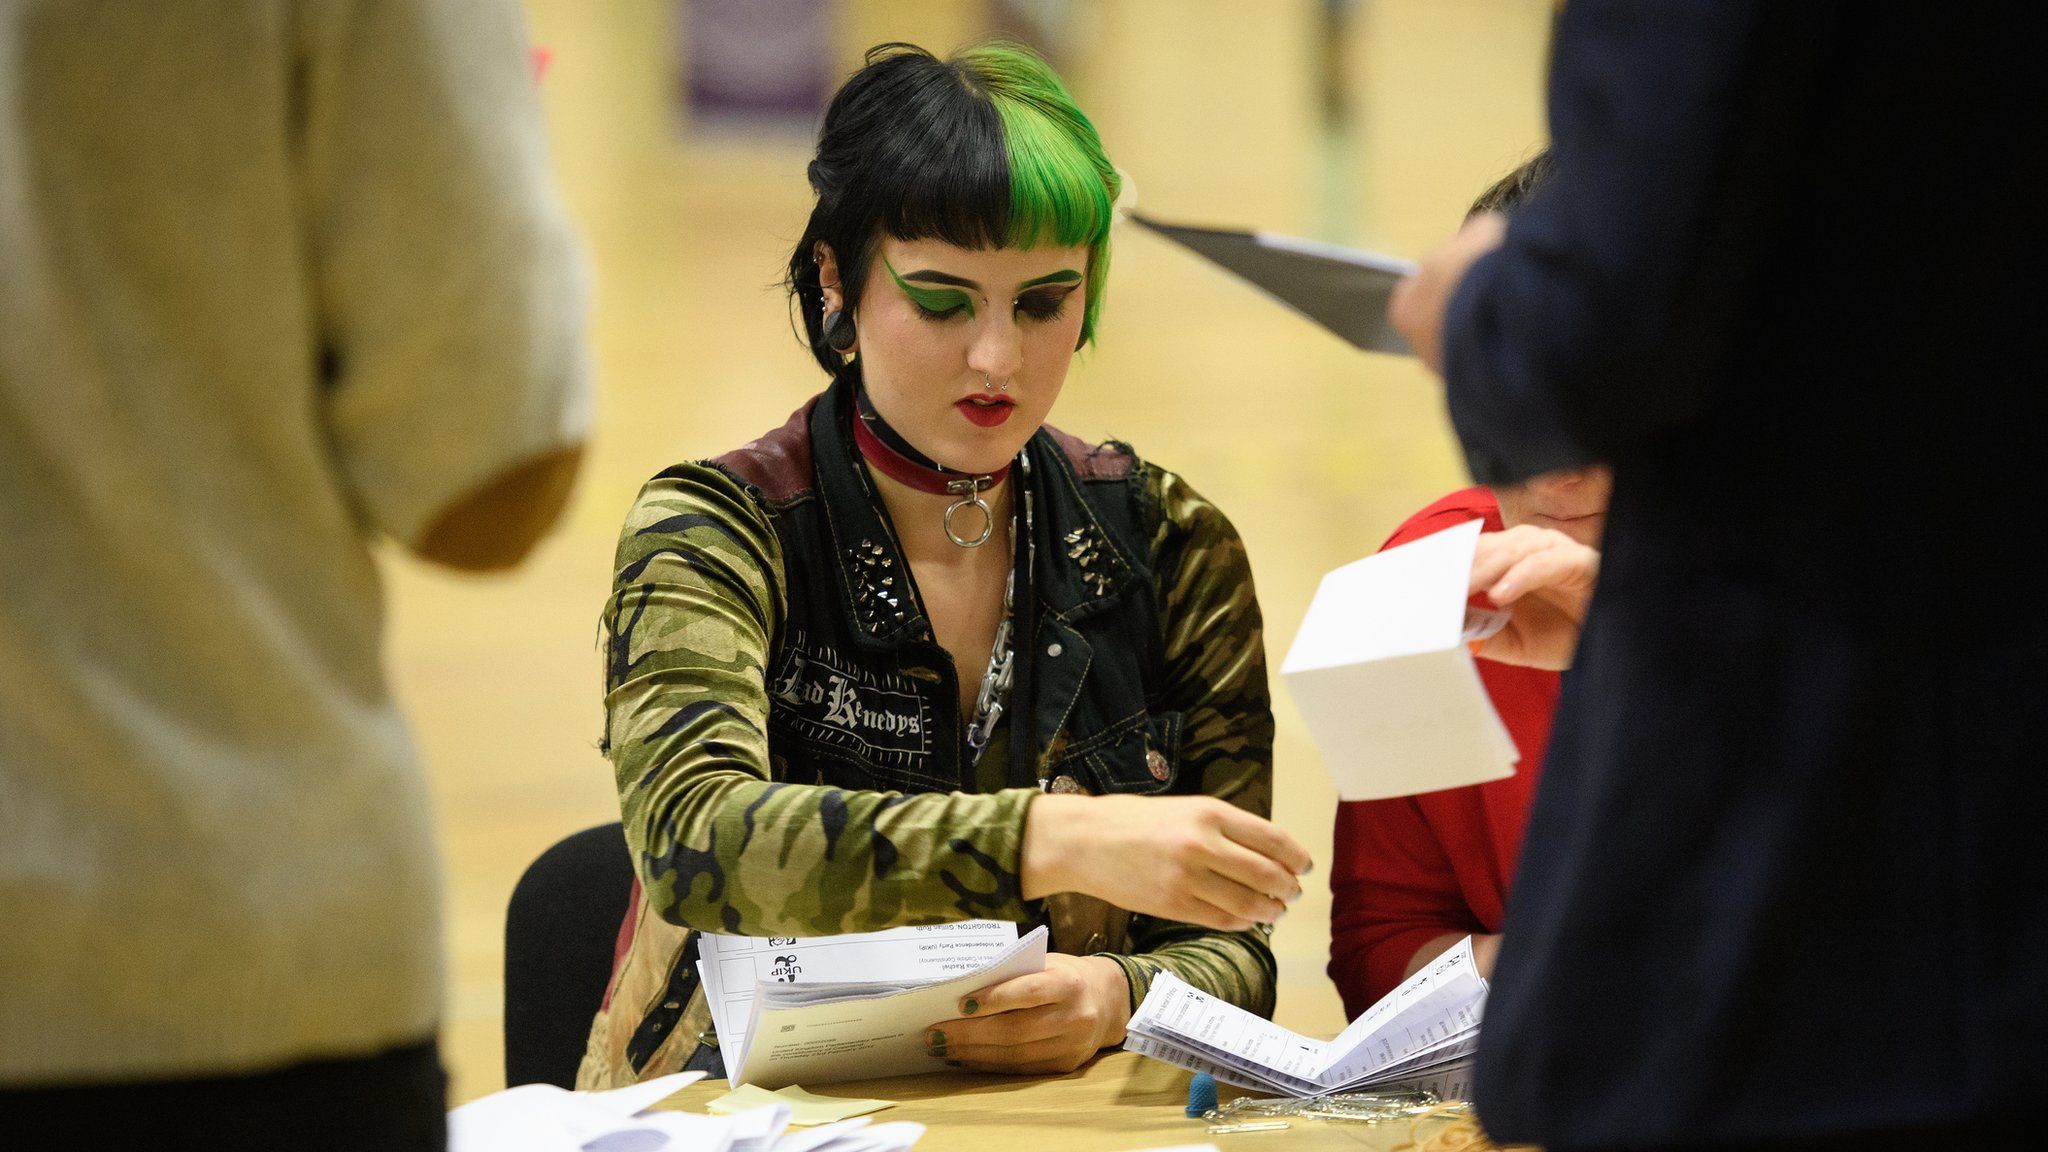 A young person counts ballots at a polling station